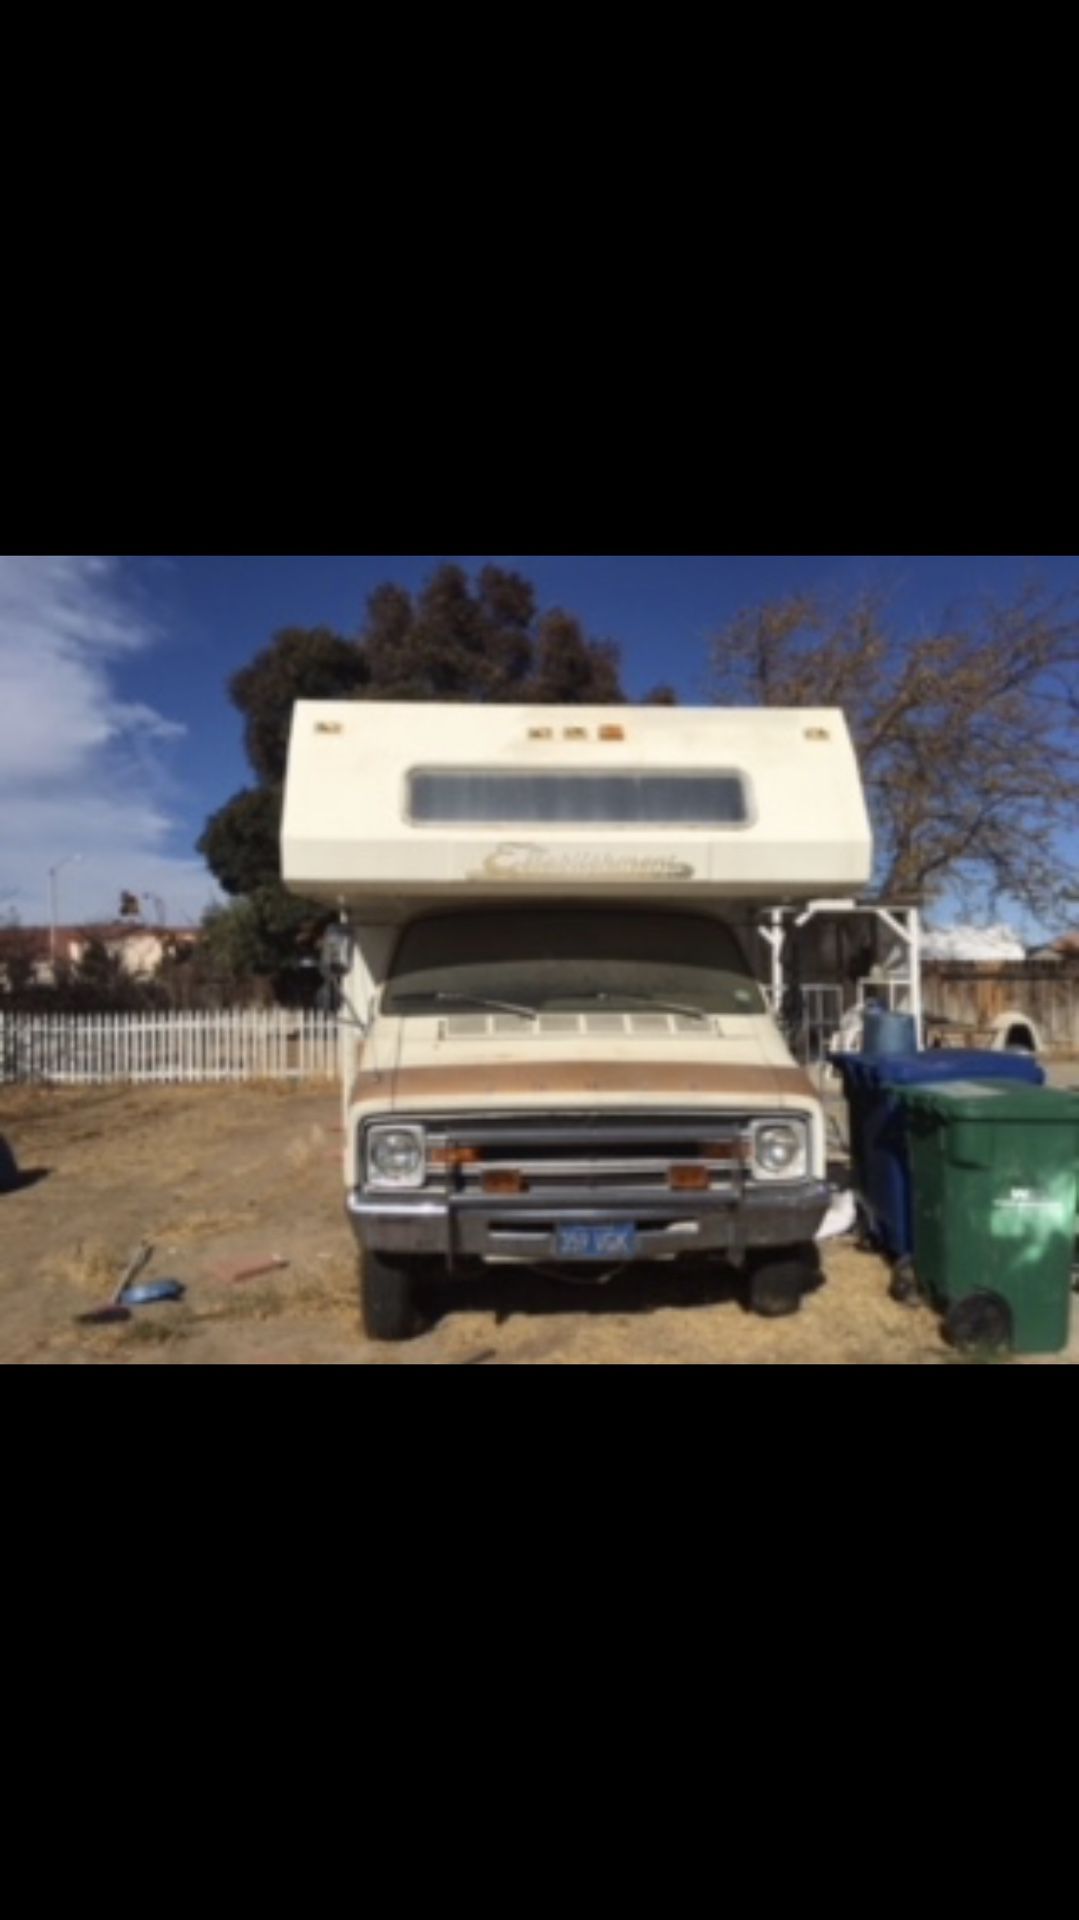 Dodge RV 1978 FIXER UPER . Was driven to my house five years ago and was running okay . I don’t know nothing about it . Been under non op since that